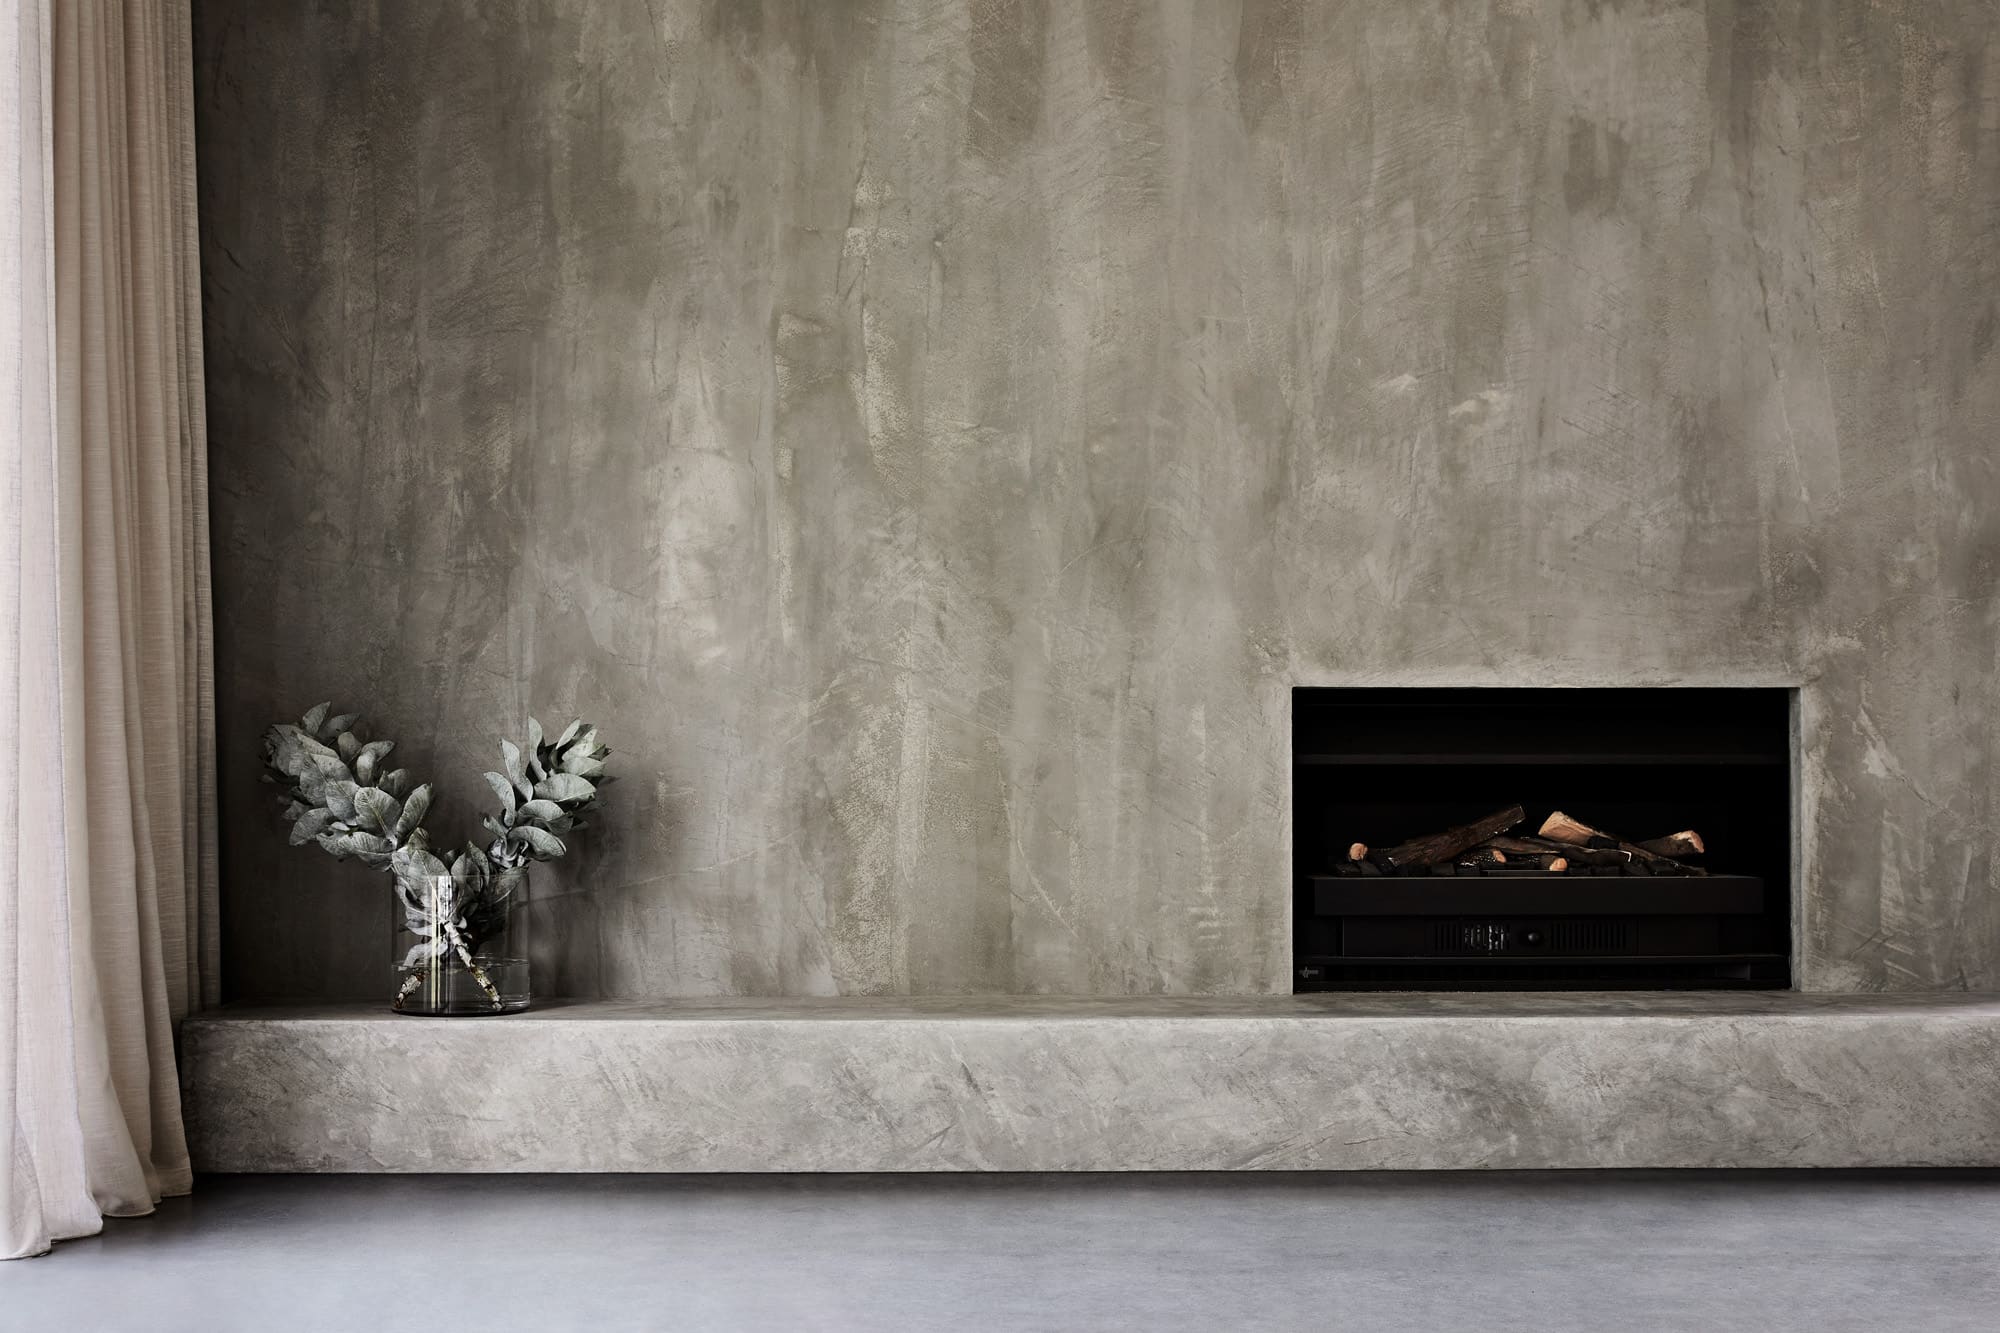 Interior shot of fireplace and grey wall